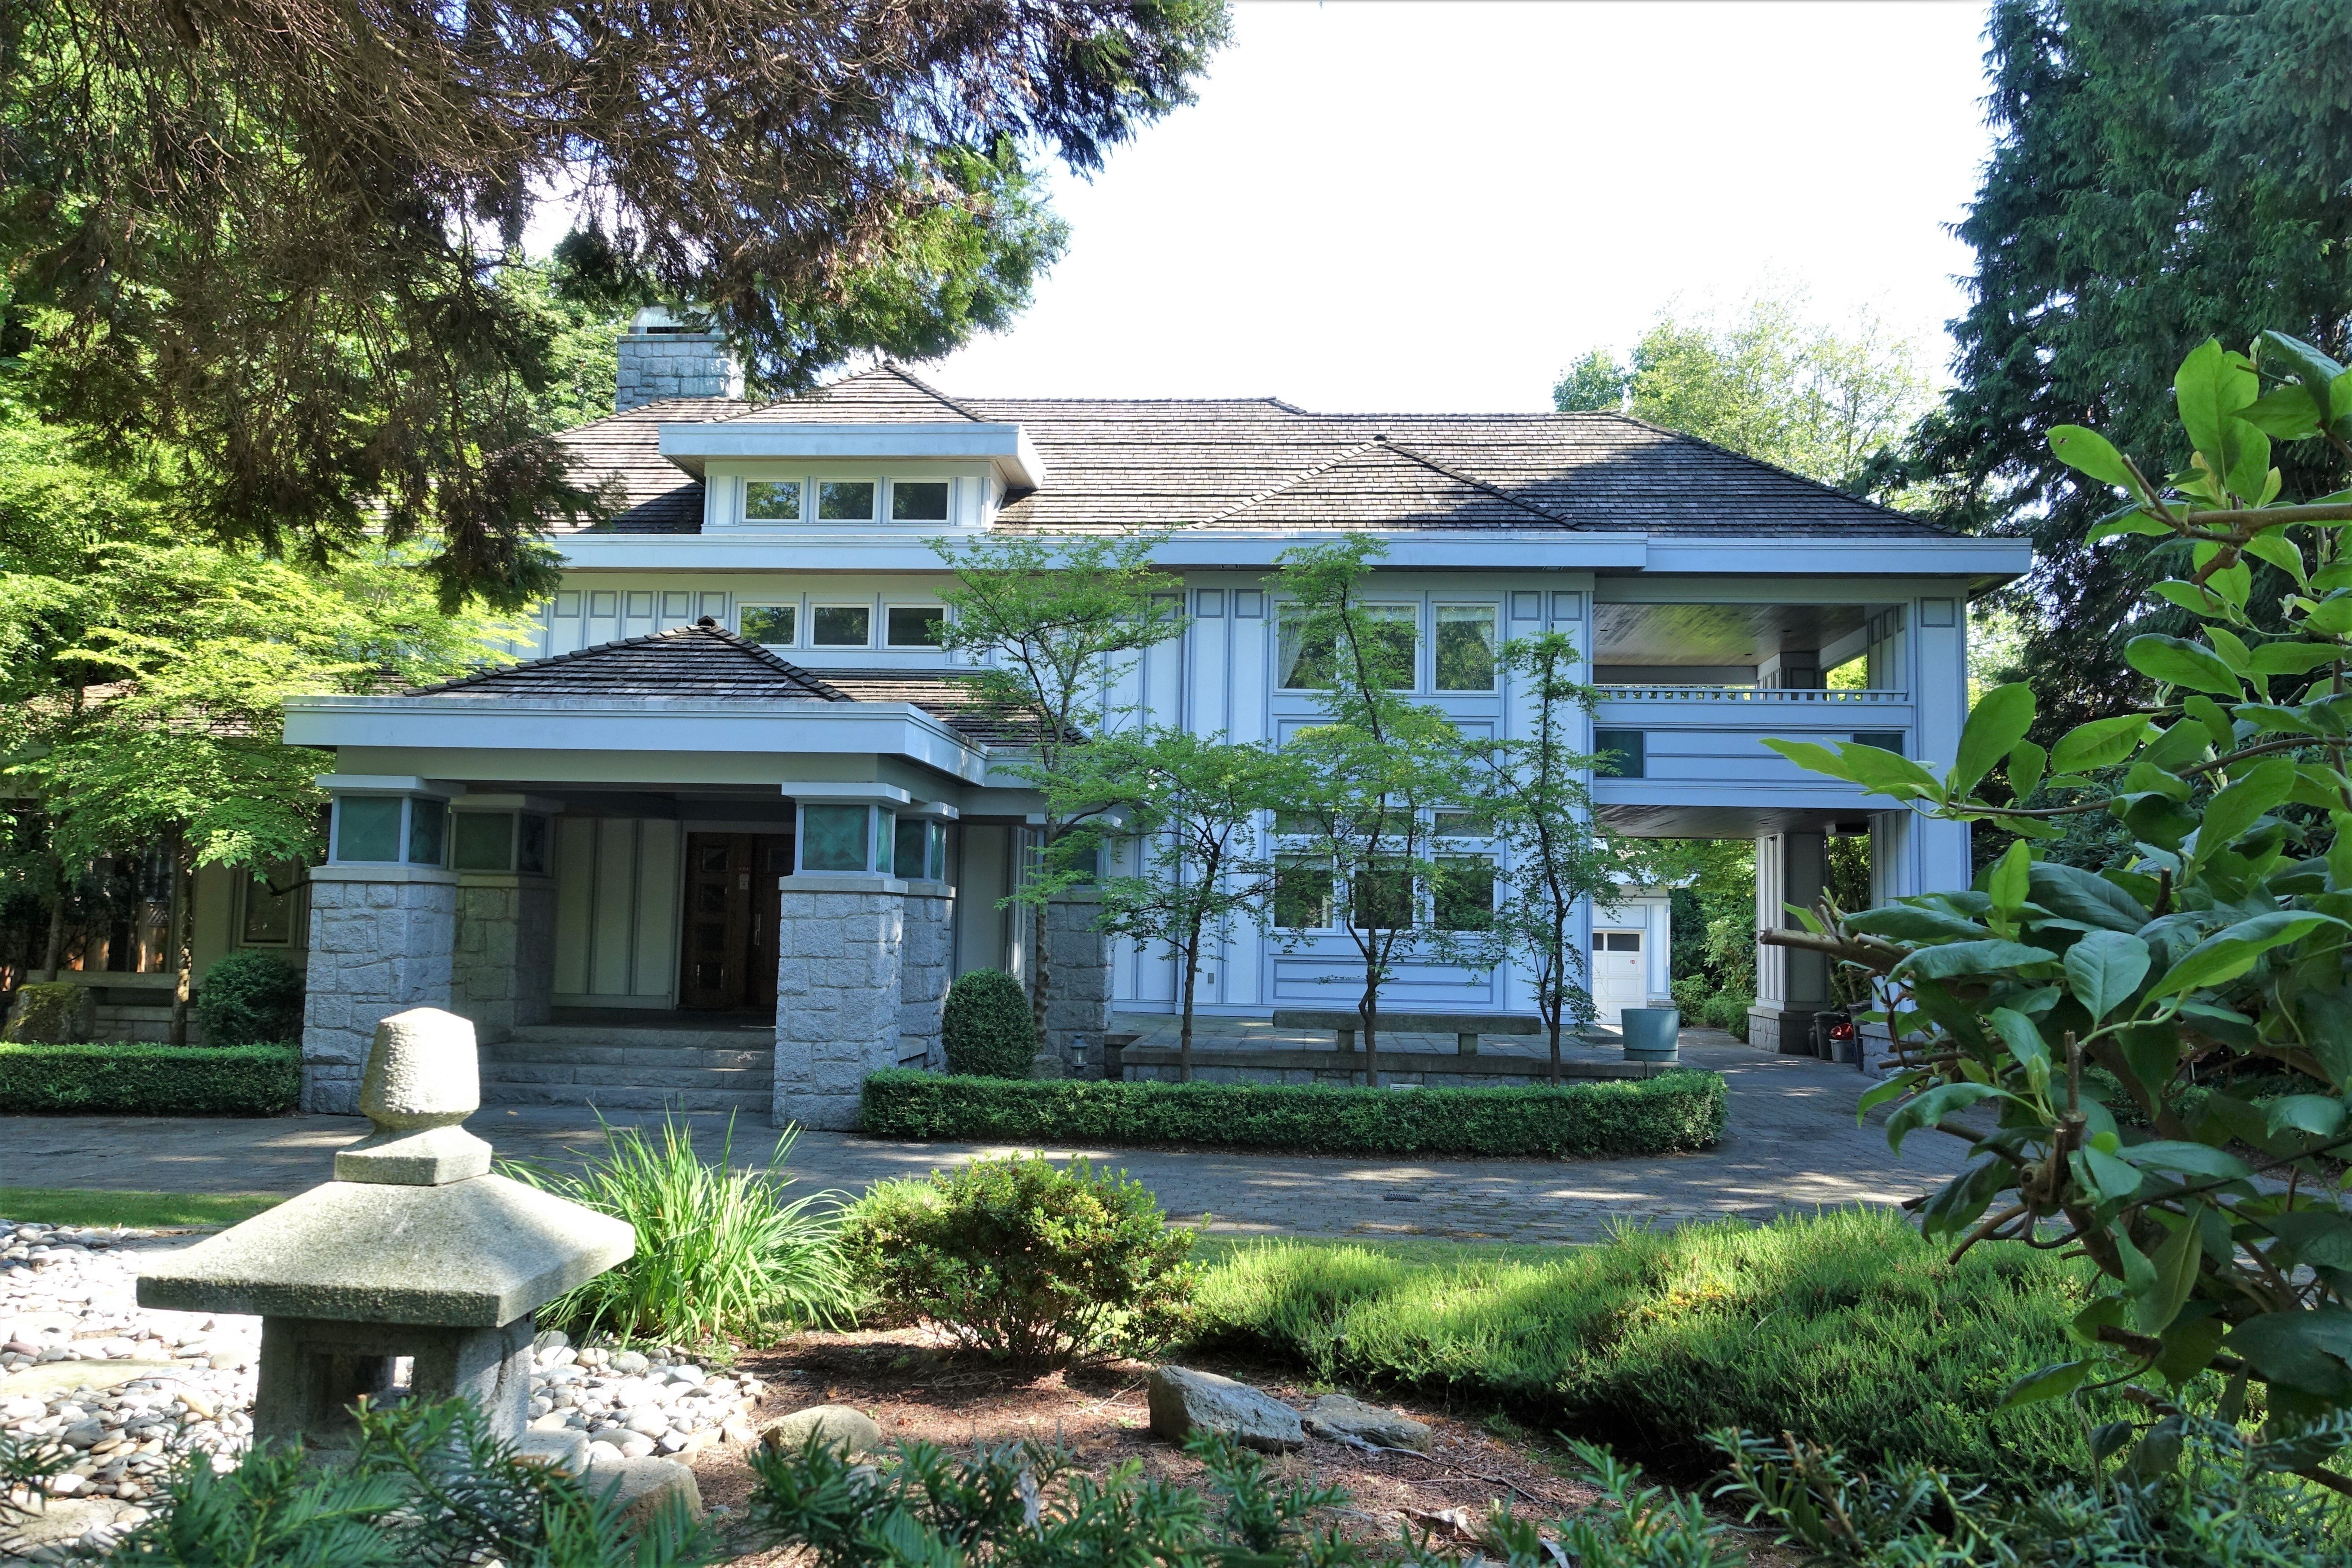 Properties such as this US$9.5 million Vancouver home, owned by Sau Po Wong, are likely to continue to be subject to vacancy taxes after the New Democratic Party won a clear majority in the recent British Columbia election. Photo: Ian Young